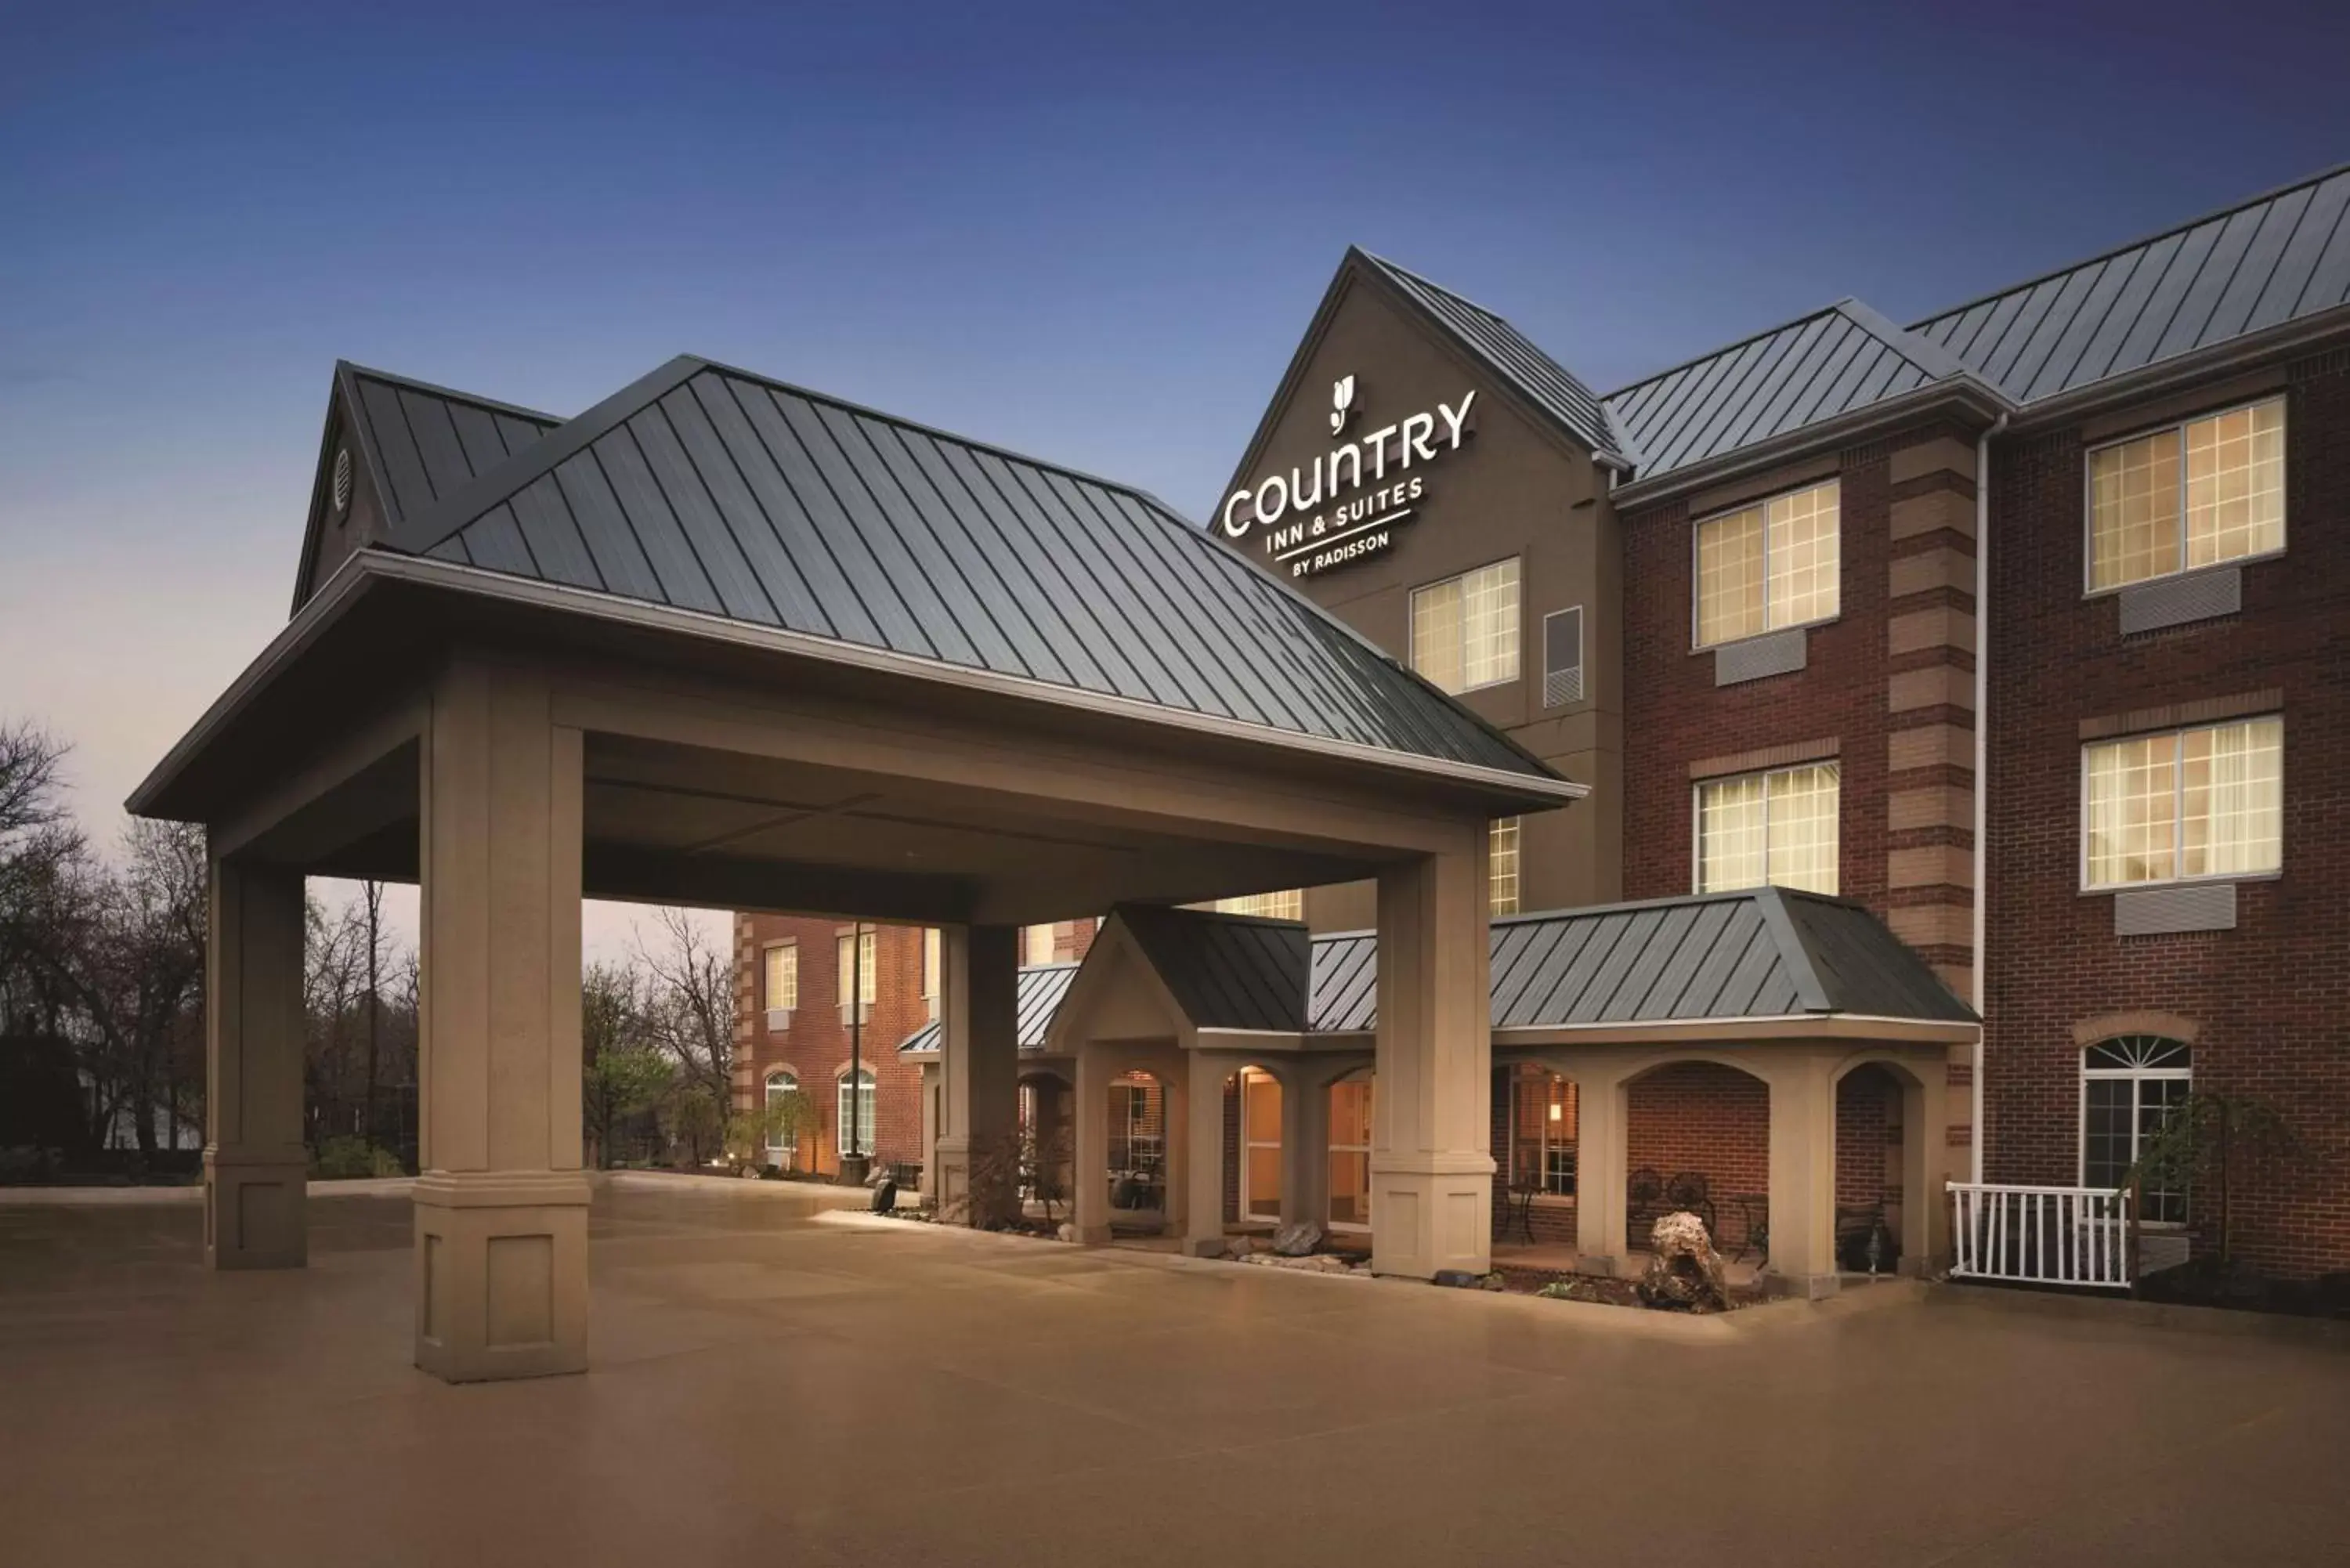 Property building in Country Inn & Suites by Radisson, Rocky Mount, NC